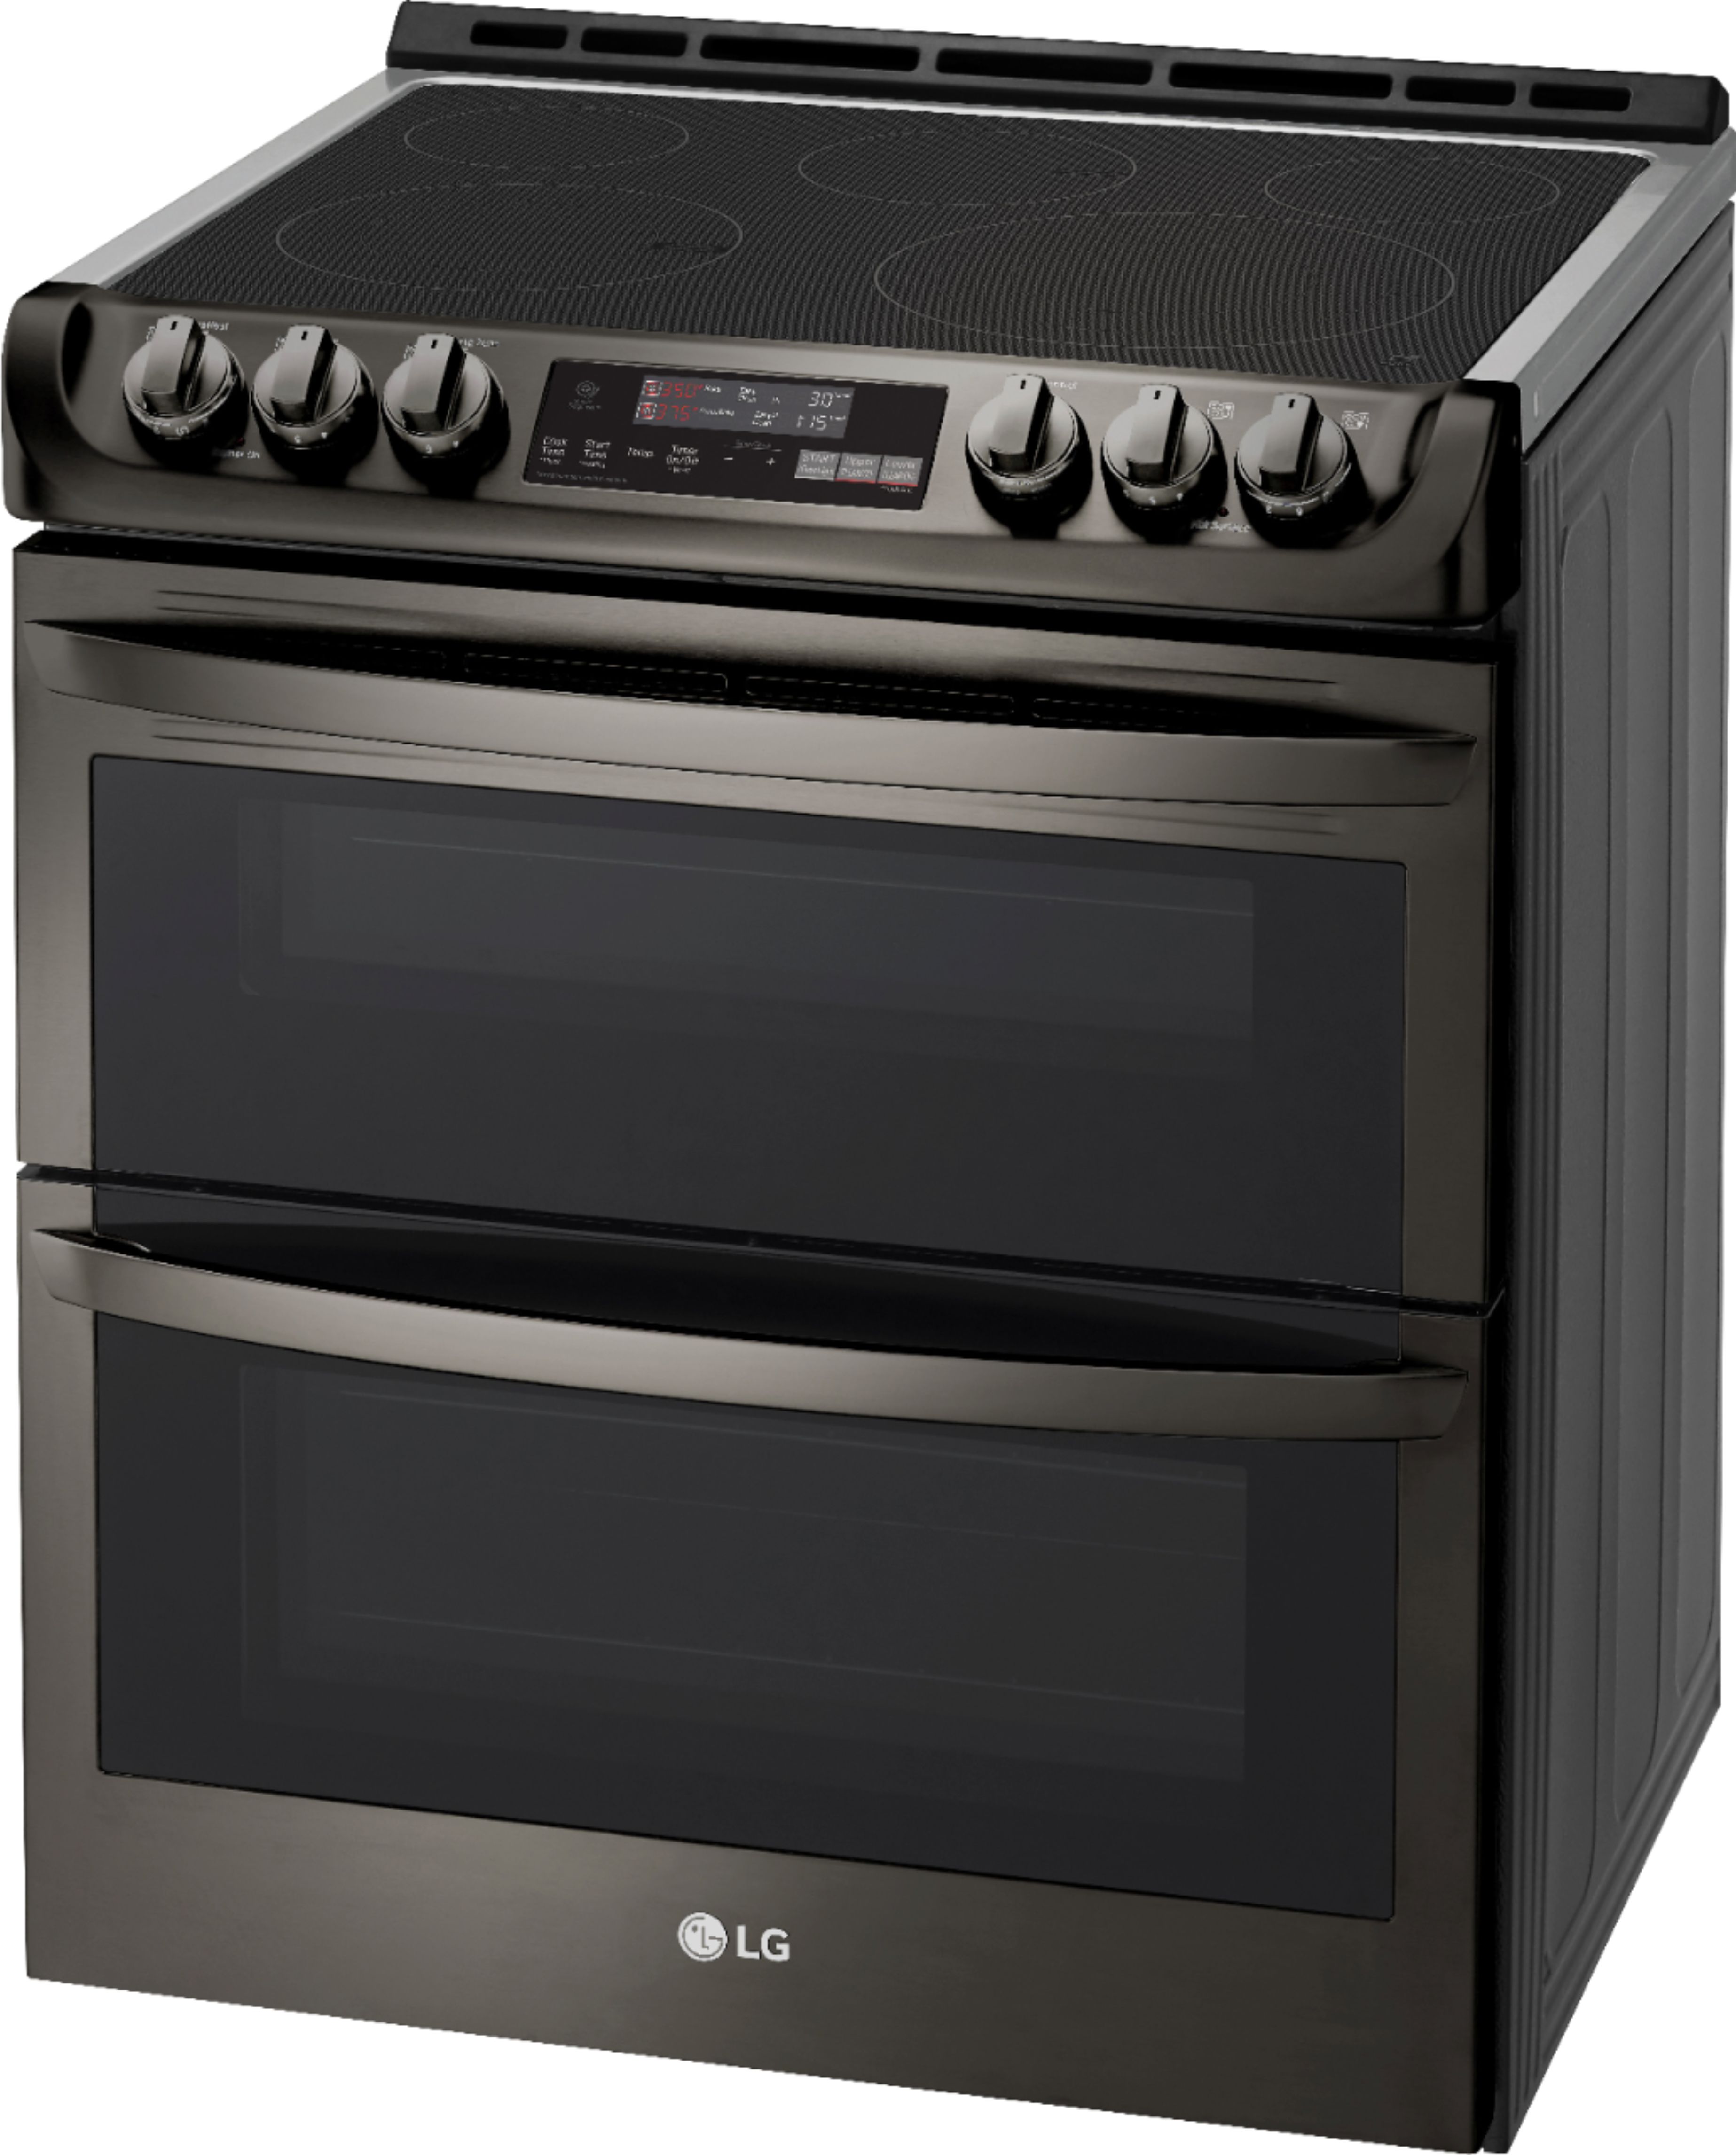 Left View: LG - 7.3 Cu. Ft. Smart Slide-In Double Oven Electric True Convection Range with EasyClean and 3-in-1 Element - Black stainless steel